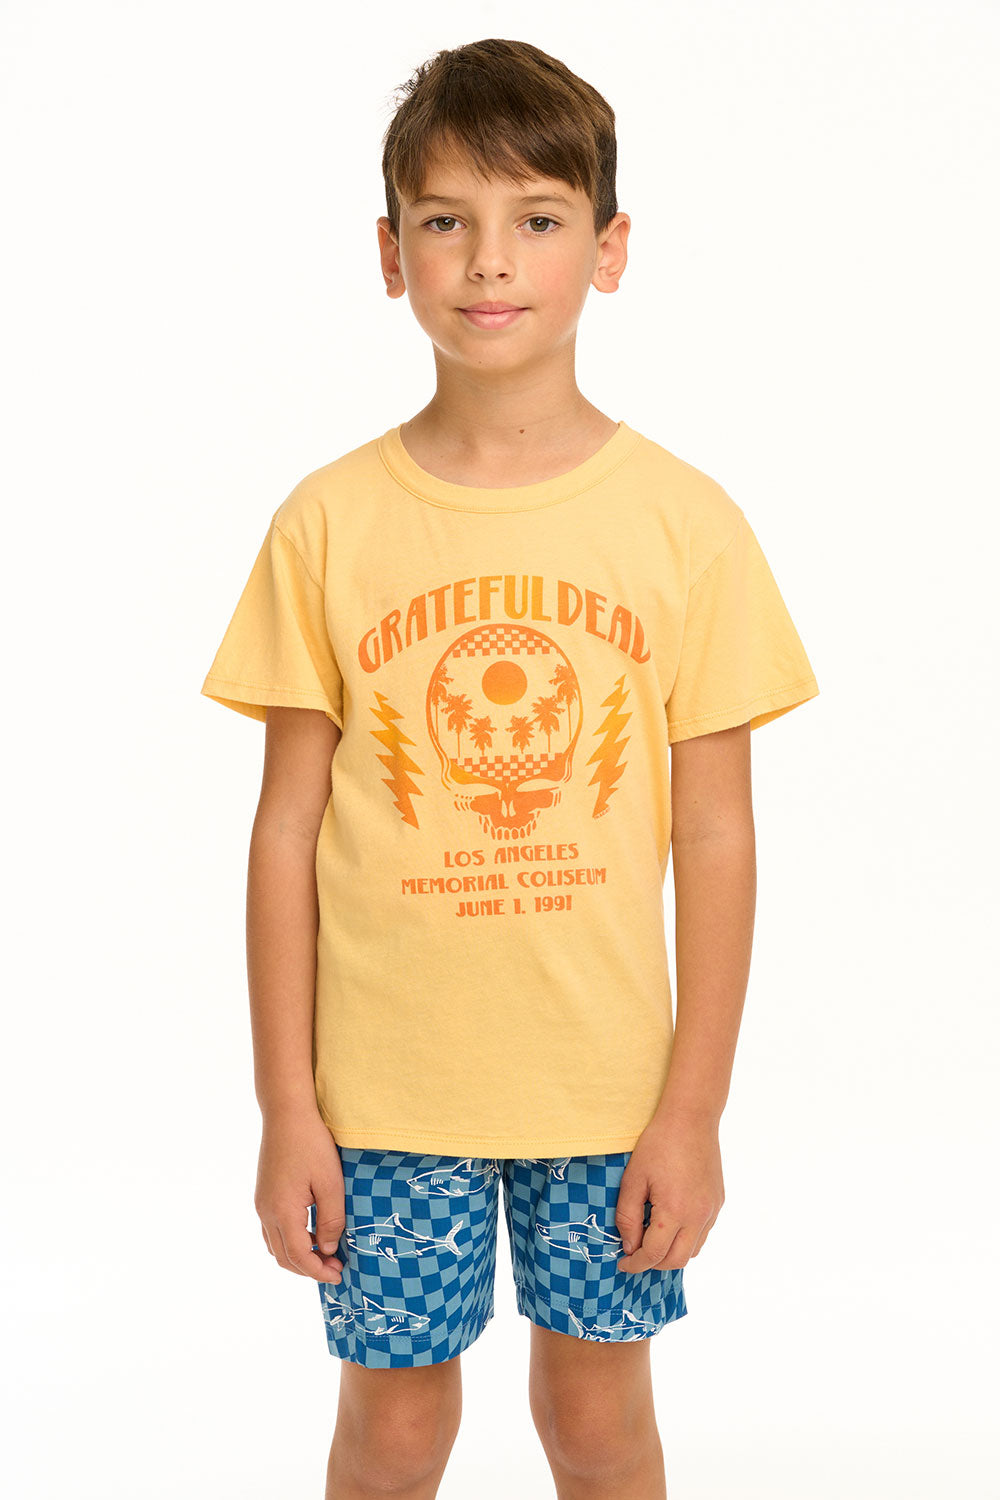 Grateful Dead - Los Angeles Tee BOYS chaserbrand